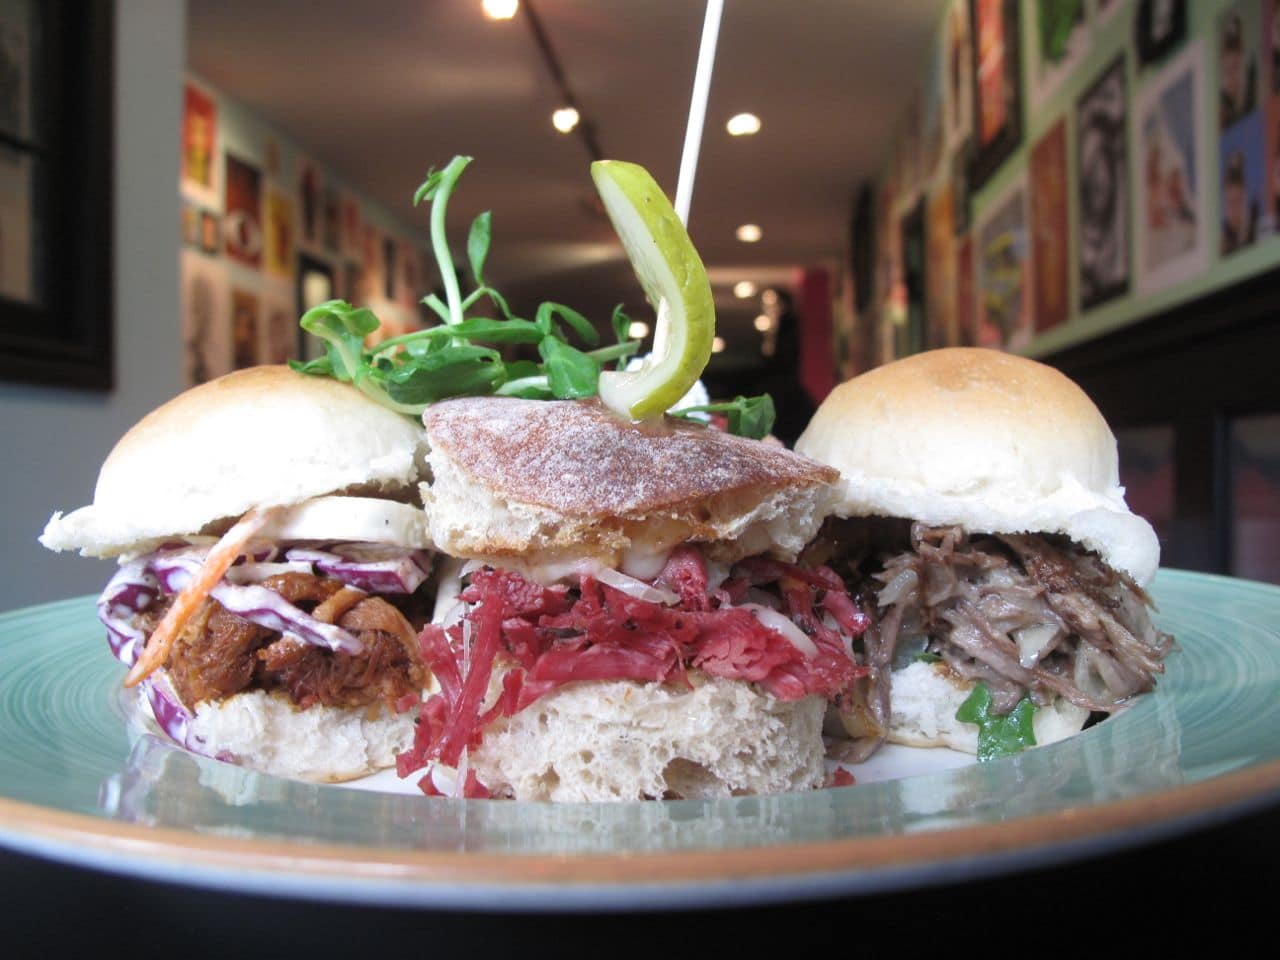 Slider Sampler at The Early Bird London featuring braised duck, smoked meat and pulled pork.